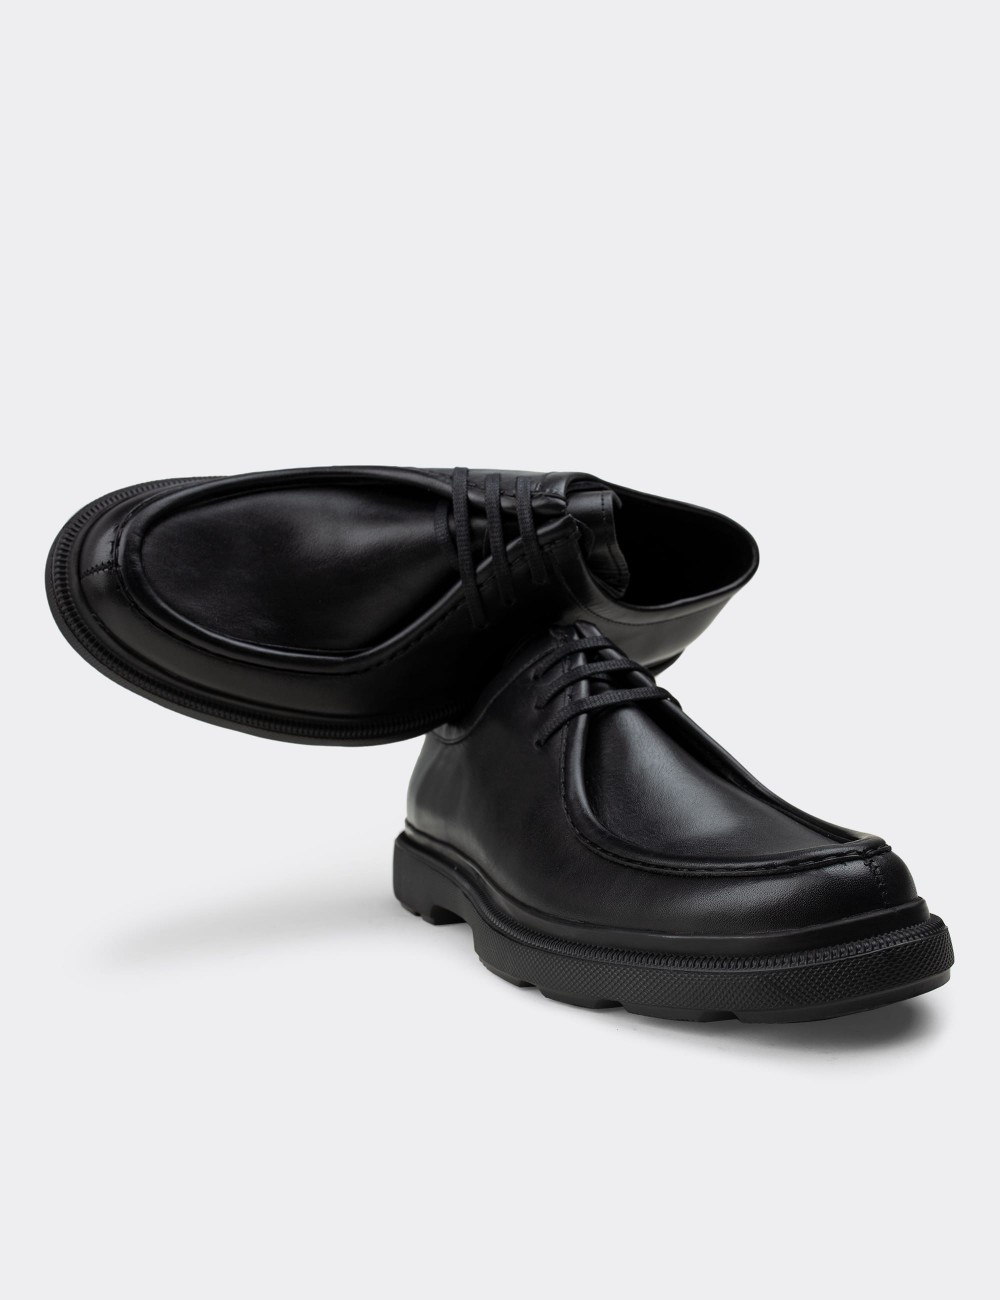 Black Leather Lace-up Shoes - 01851MSYHP02